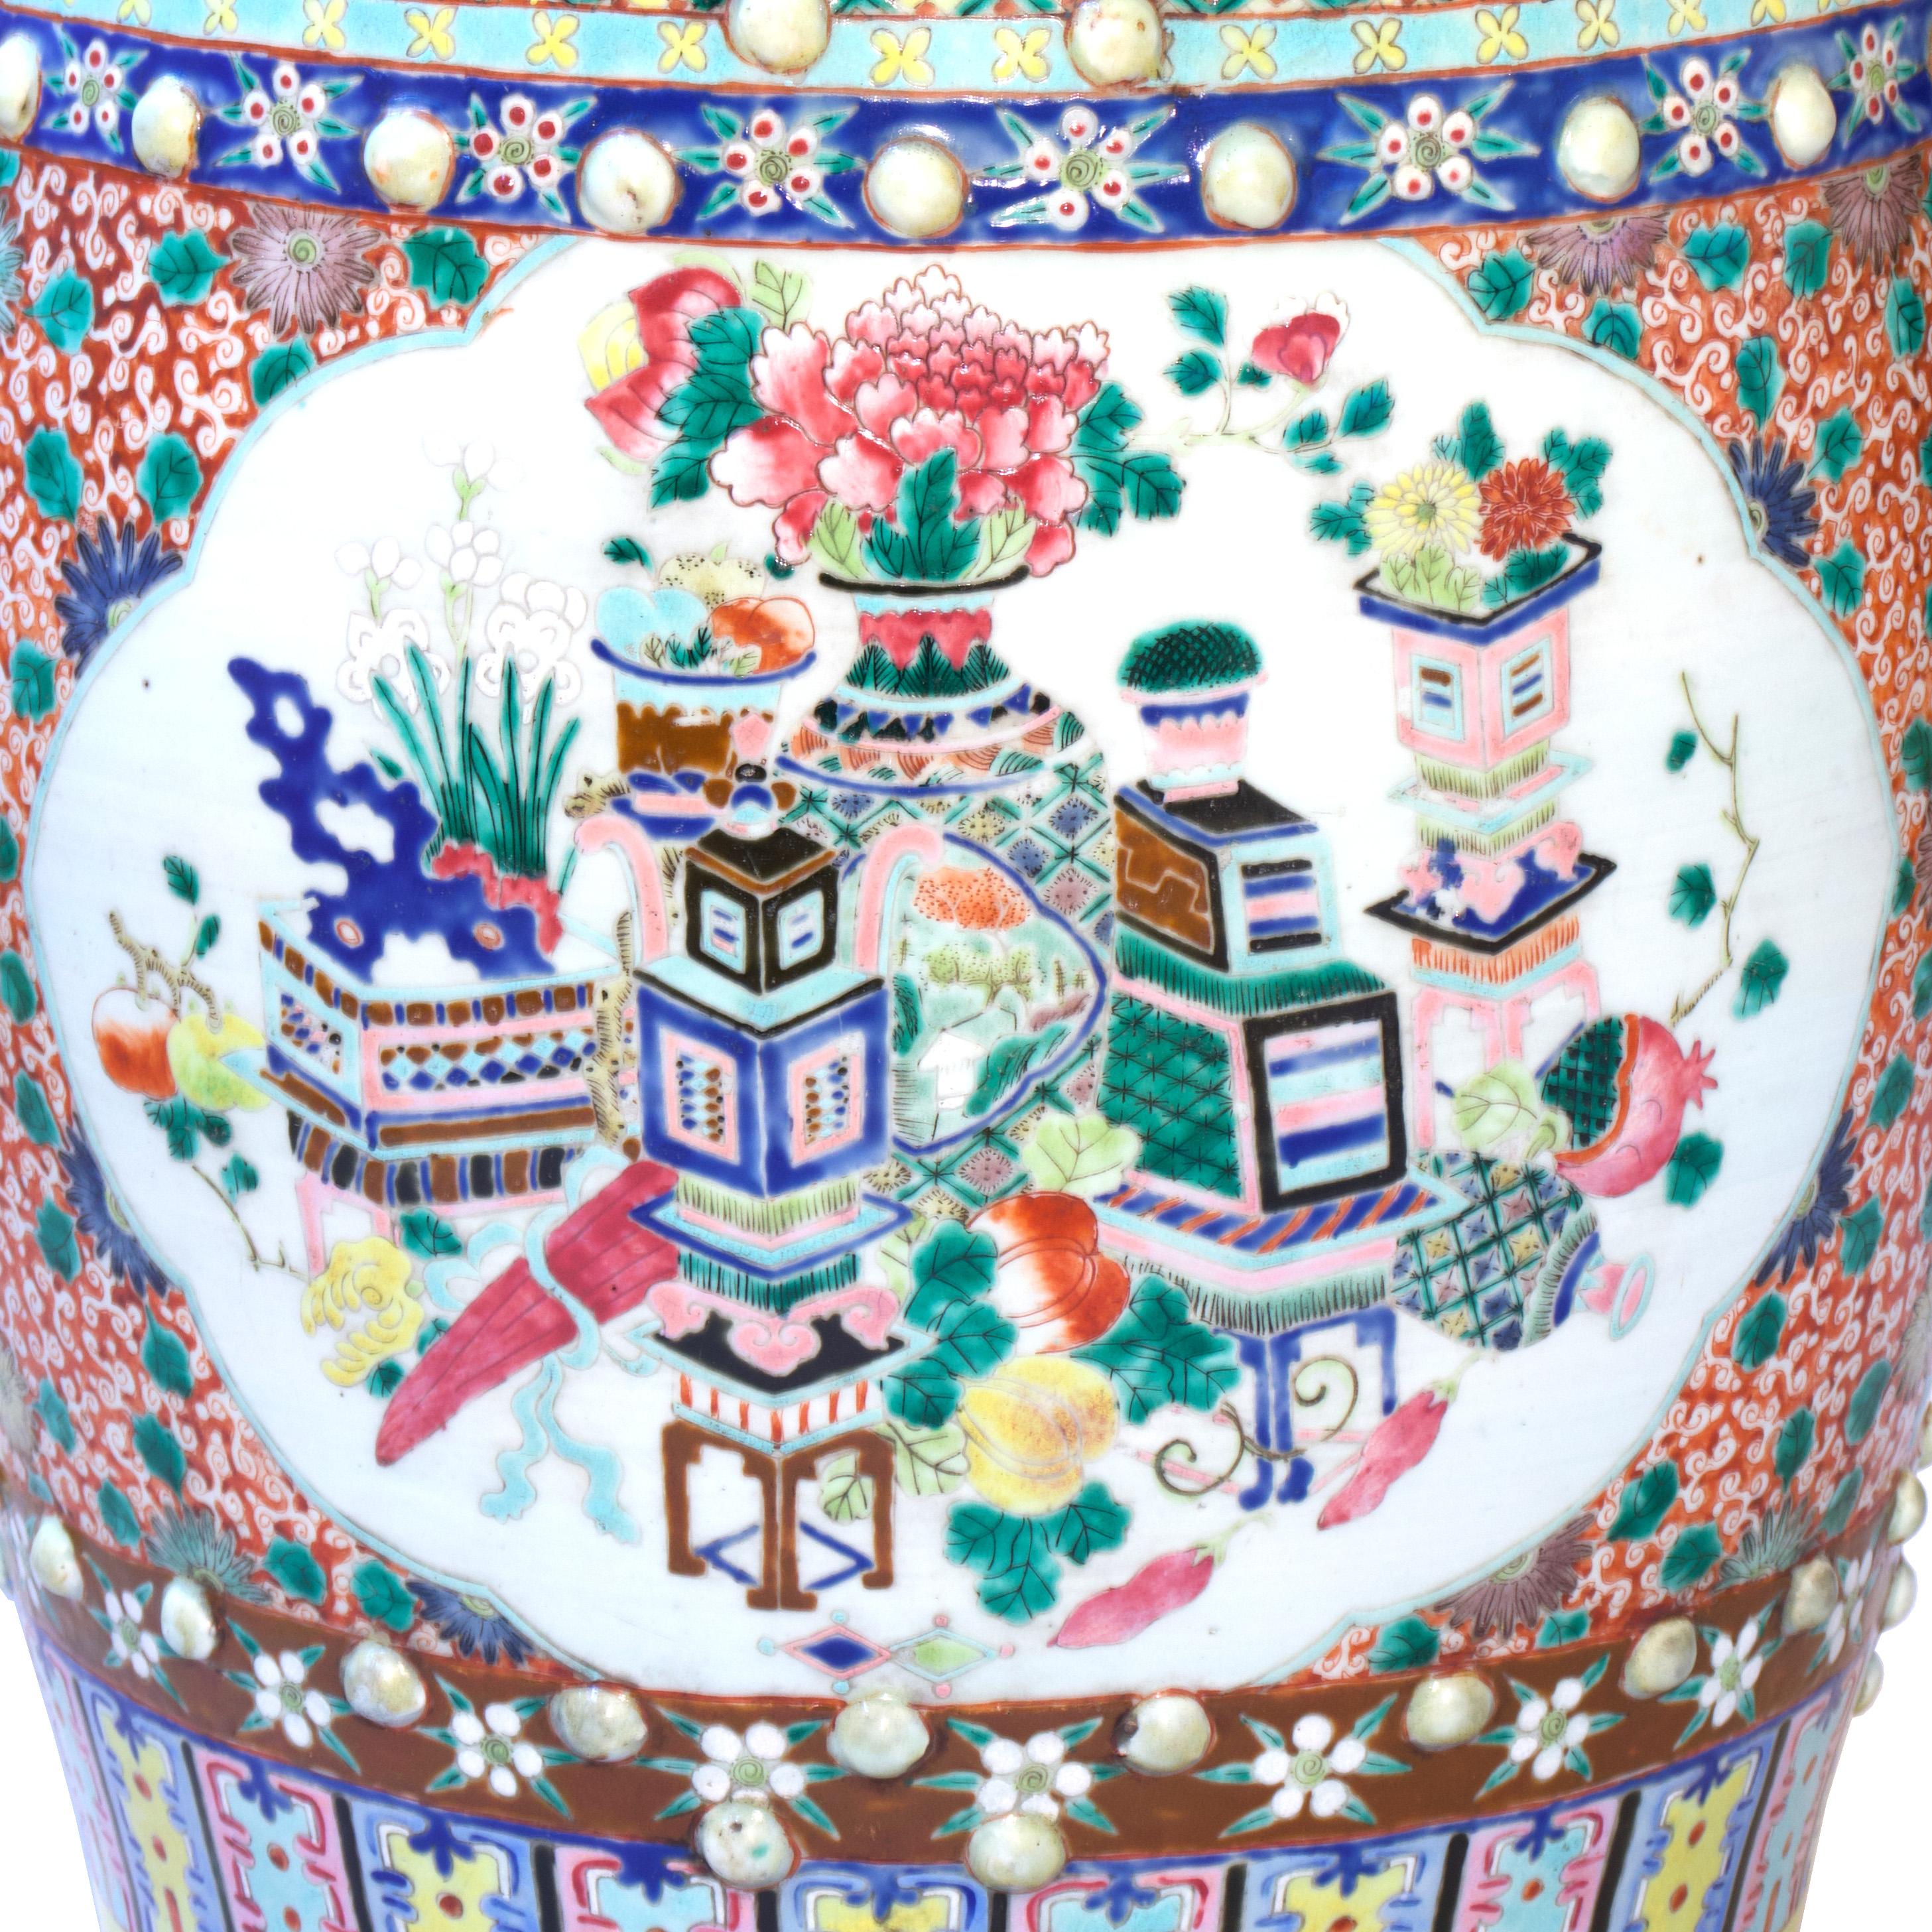 The barrel drum form with coin cutouts on top and overlapping on opposing sides has raised bosses in the enameled border bands top and bottom. Glazed overall with various multicolored polychrome enamels with two large cartouches on the sides